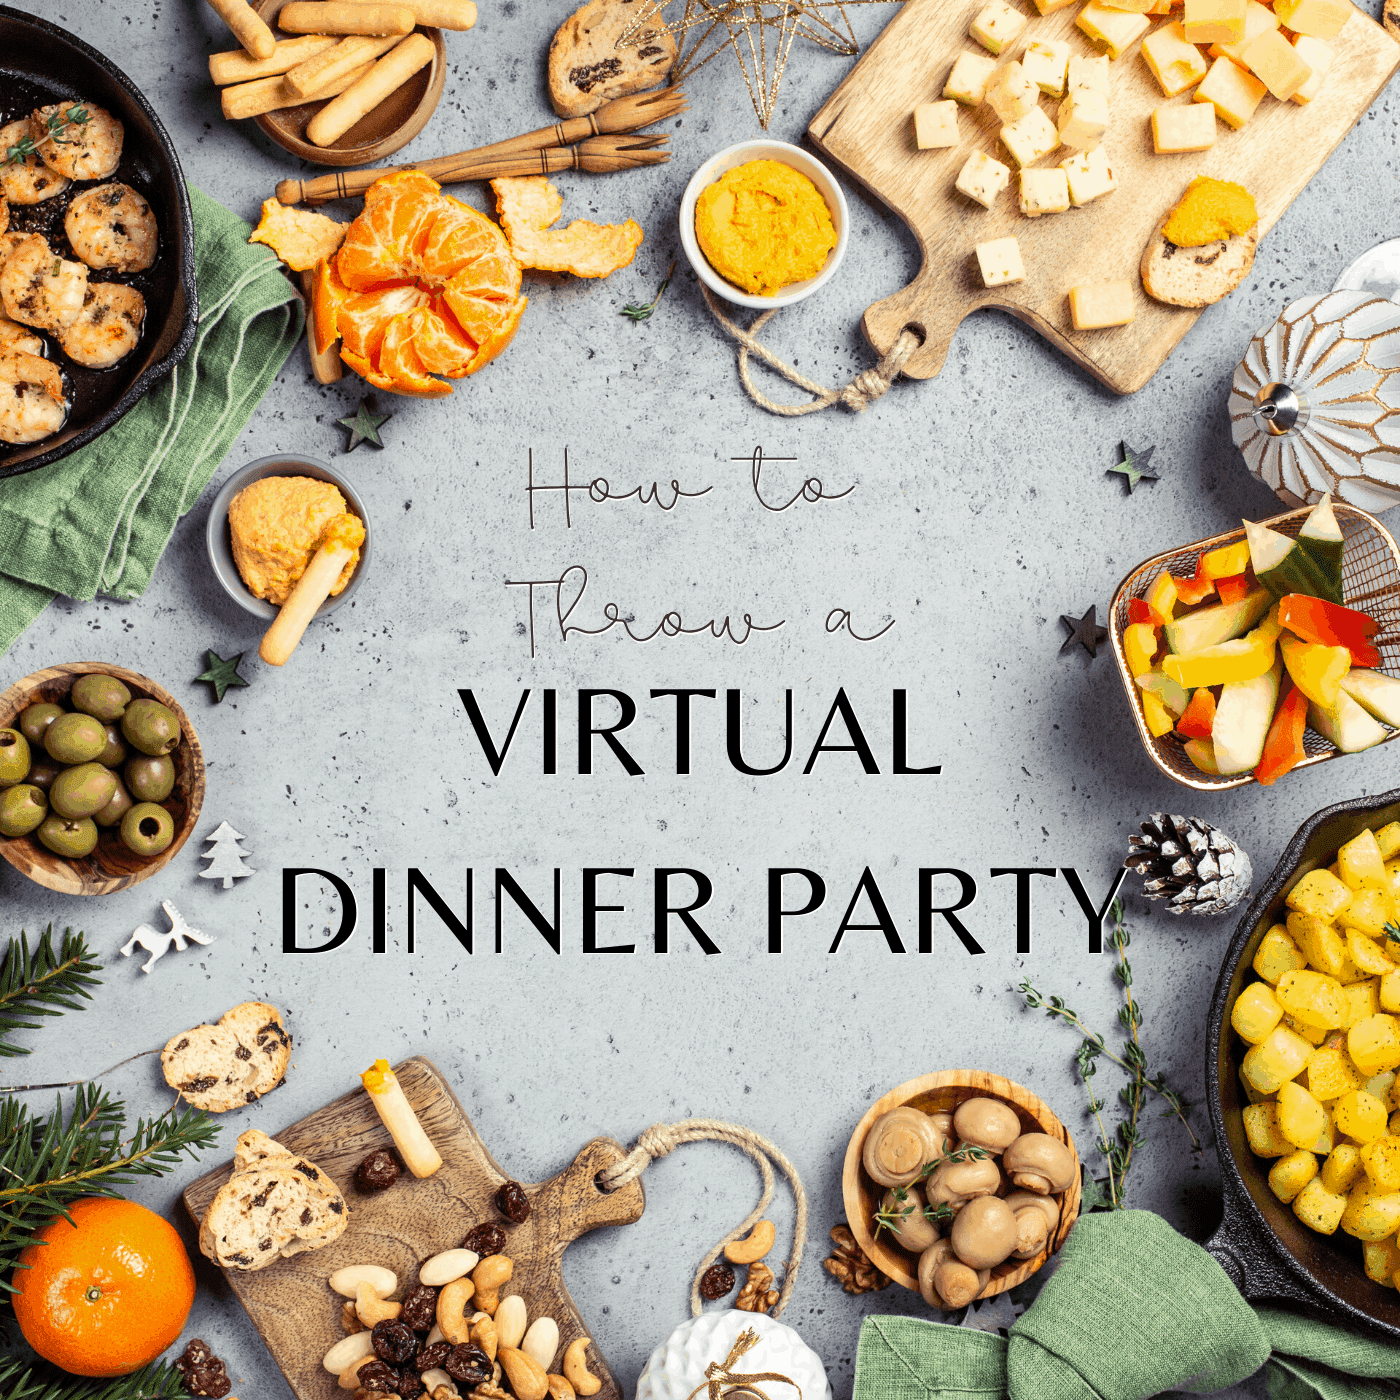 https://iambaker.net/wp-content/uploads/2020/04/Dinner-Party-Featured.png